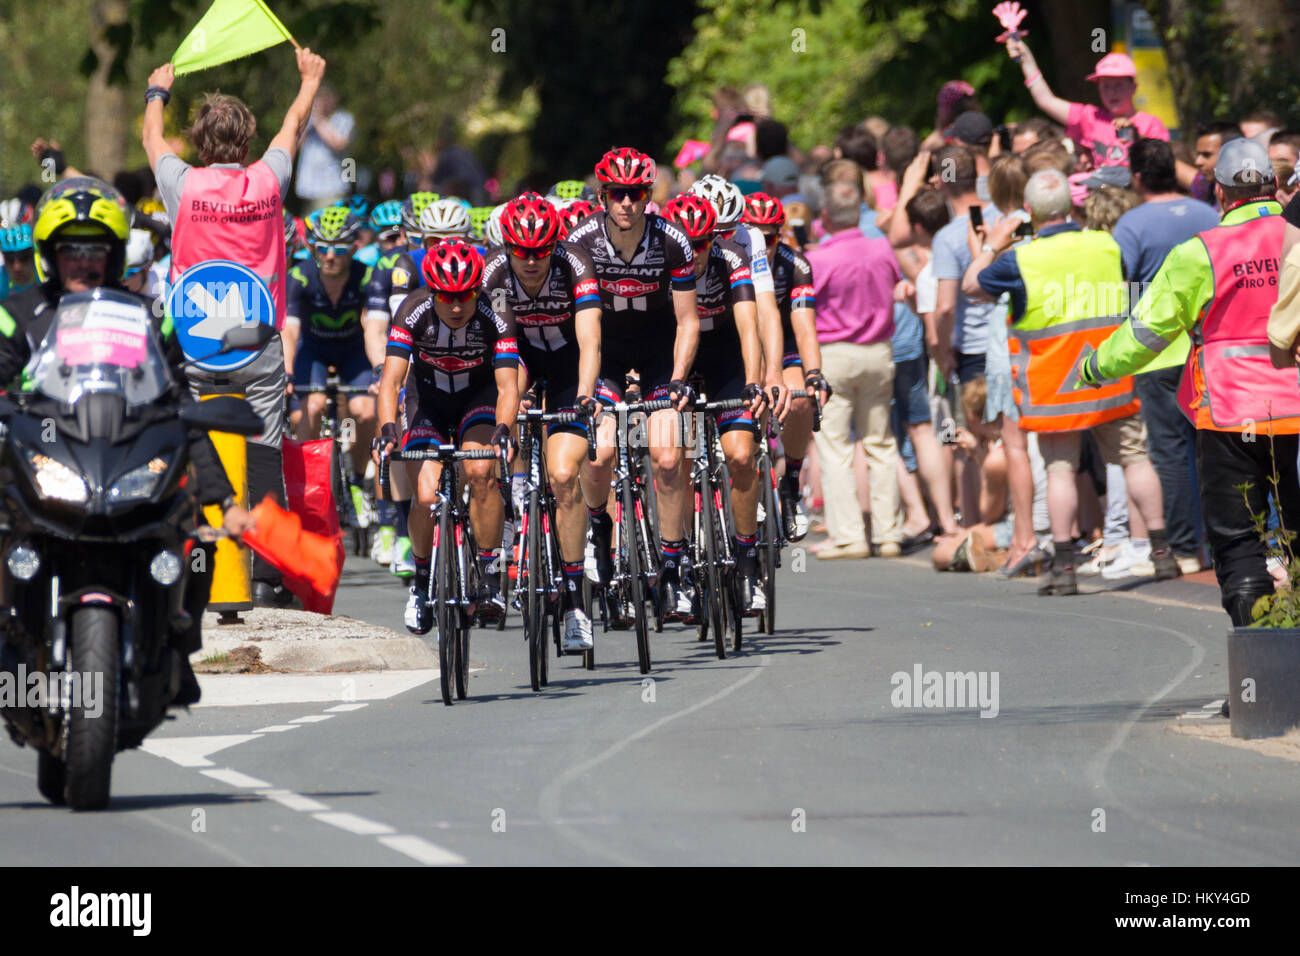 Cyclists of Team Giant-Alpecin during the second stage of Giro d'Italia 2016 in Beuningen, The Netherlands Stock Photo